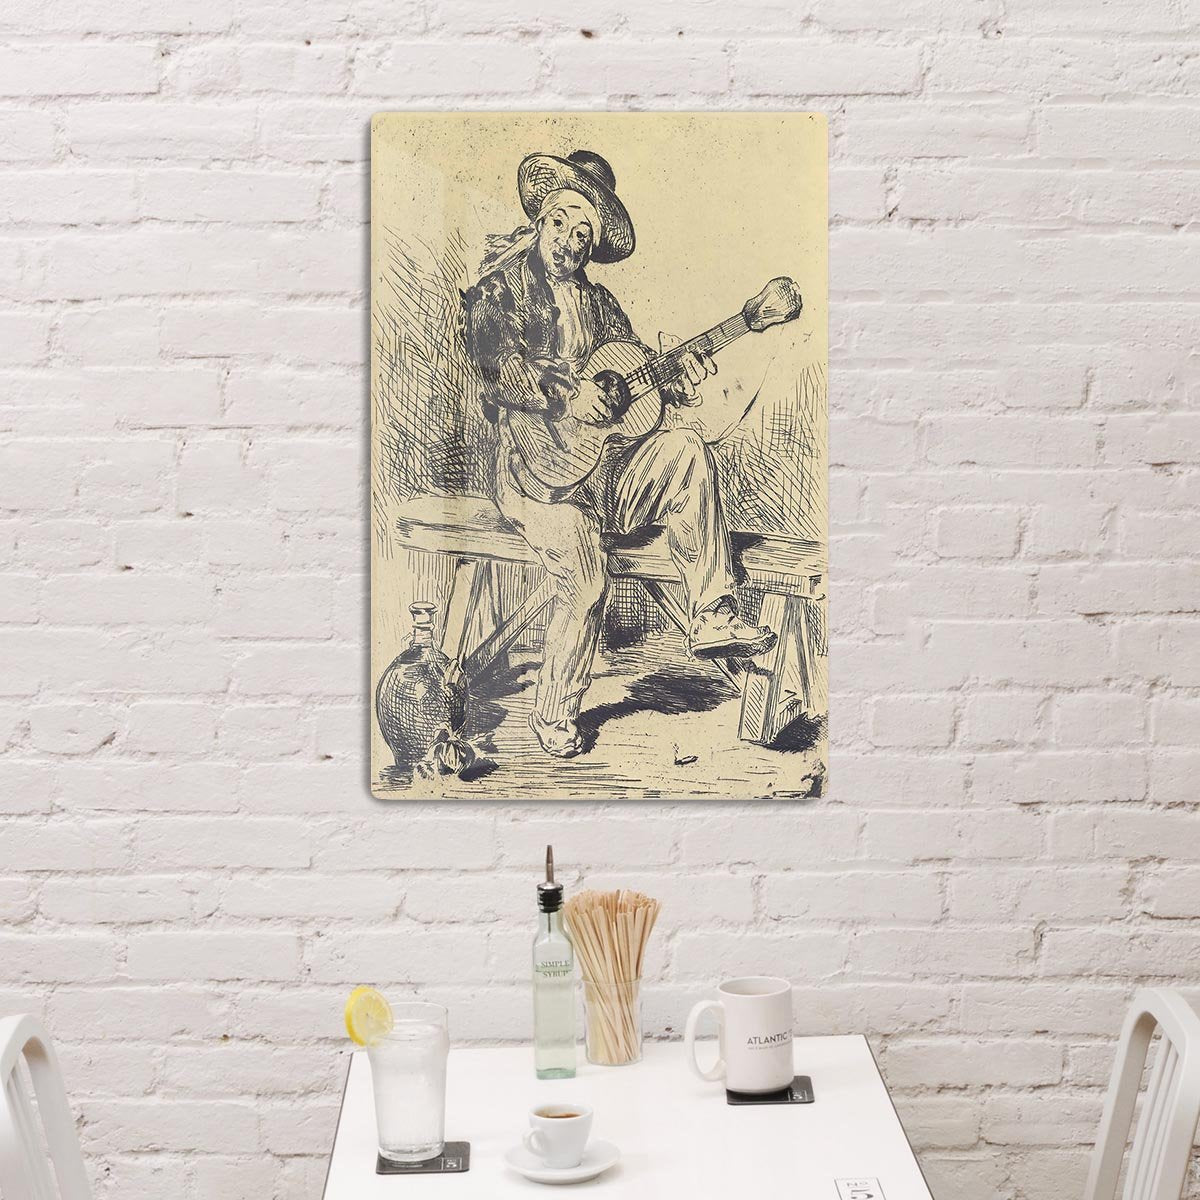 The guitar Player by Manet HD Metal Print